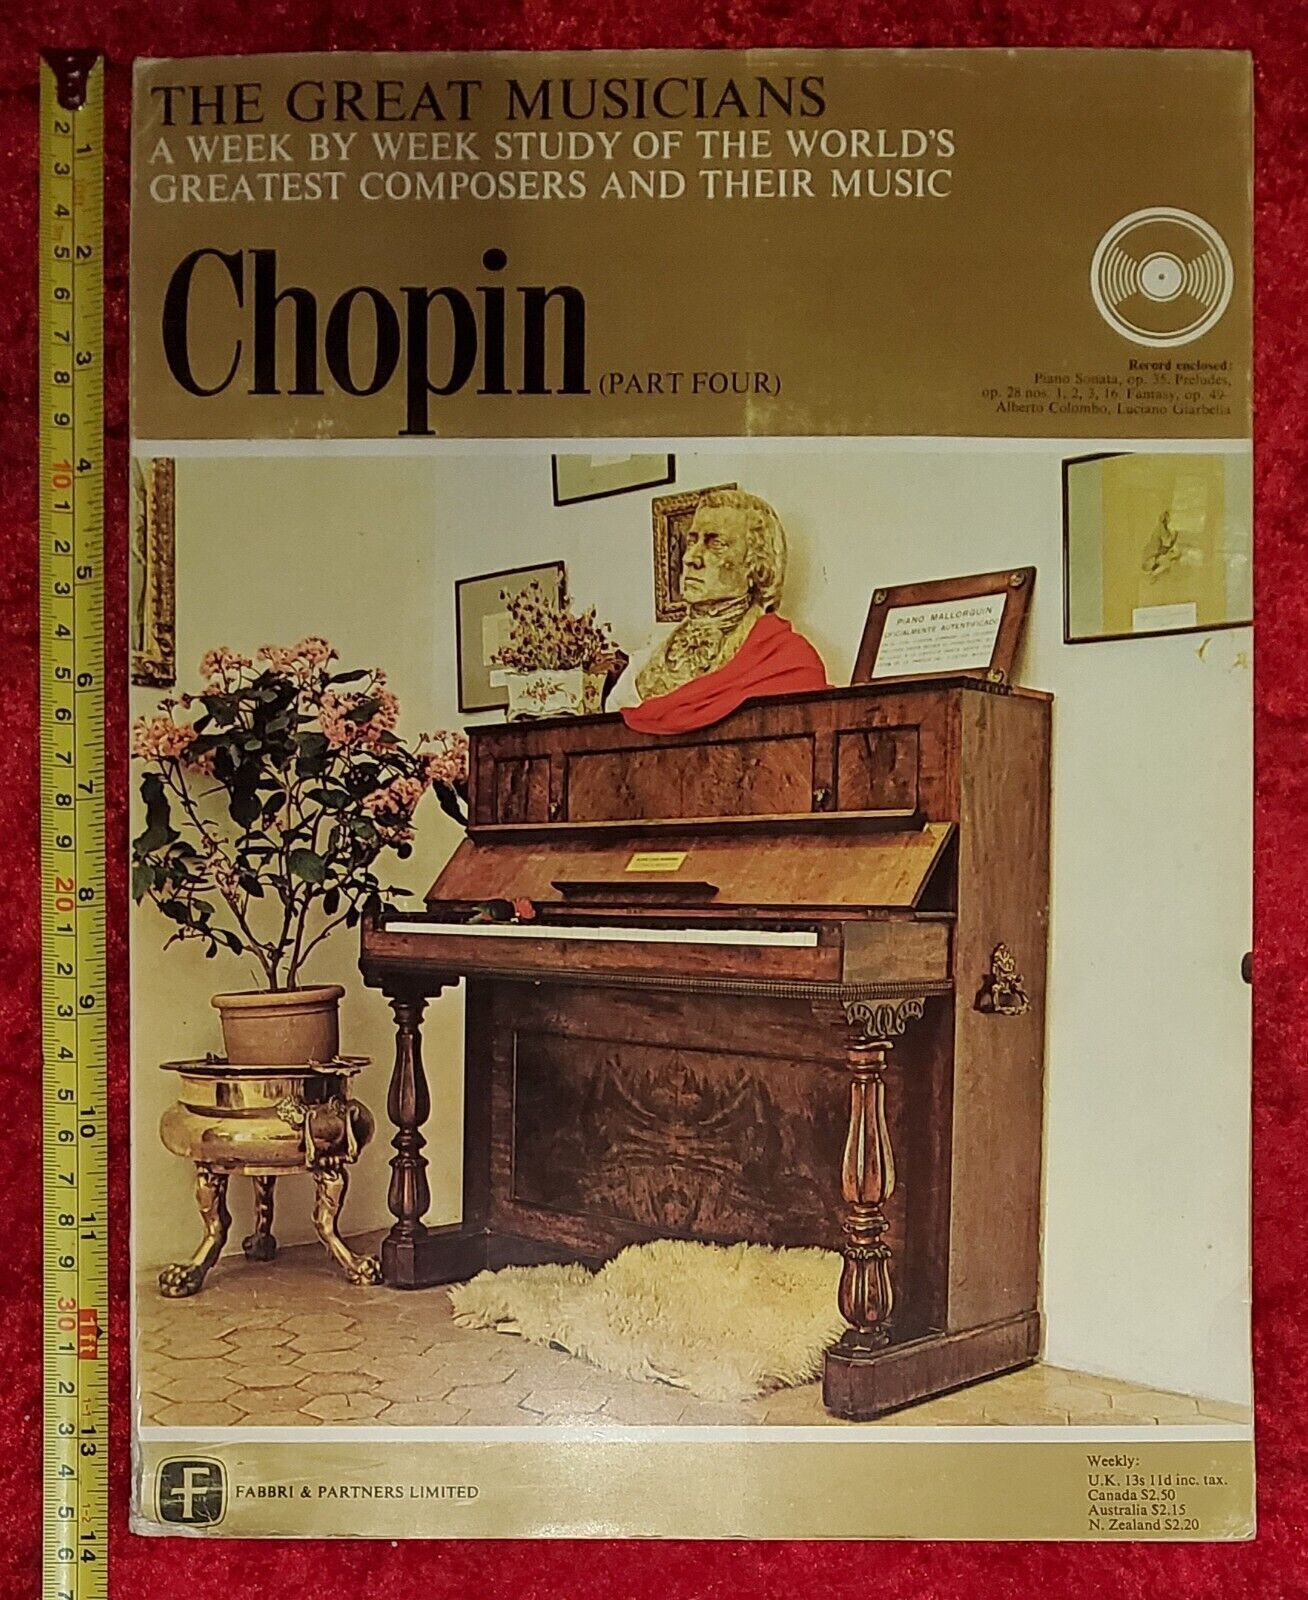 The Great Musicians - Chopin (Part Four). Ref00014